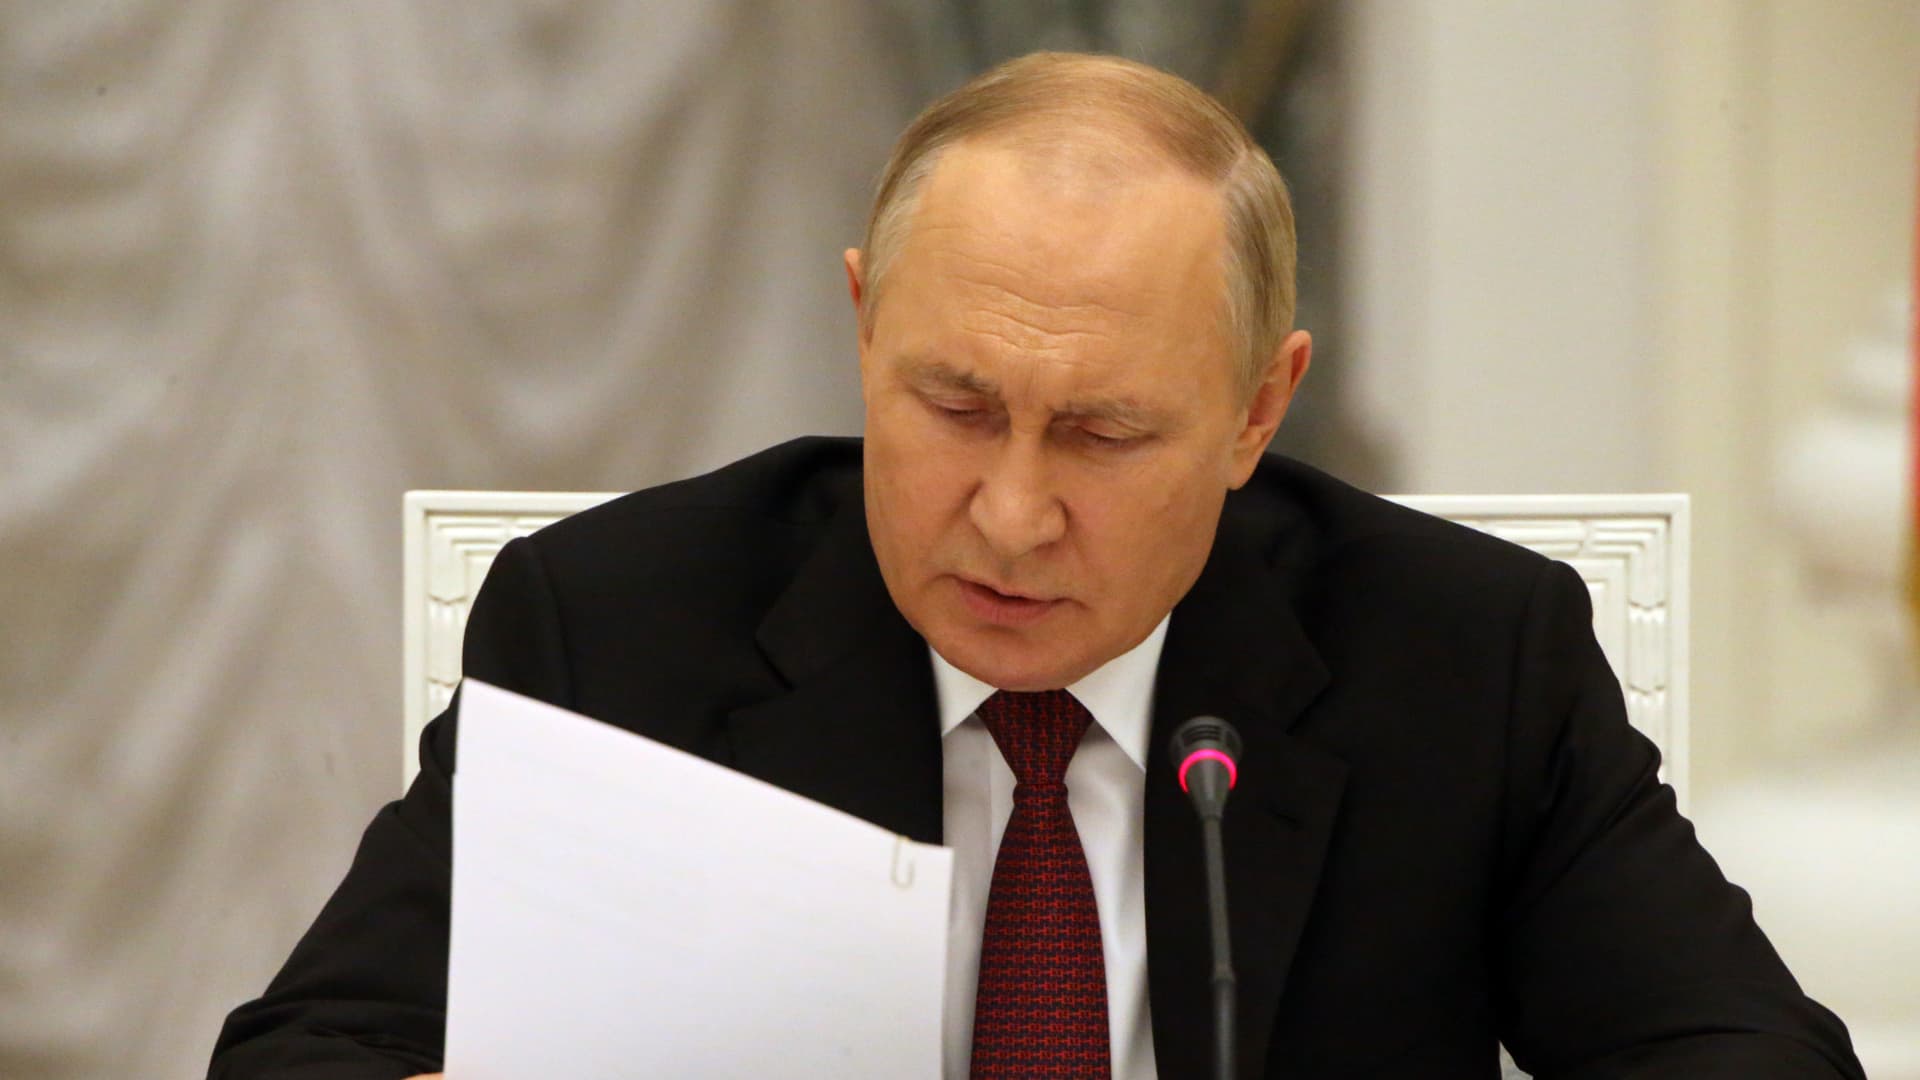 Putin declares ‘four new regions of Russia’ as Moscow illegally annexes parts of Ukraine